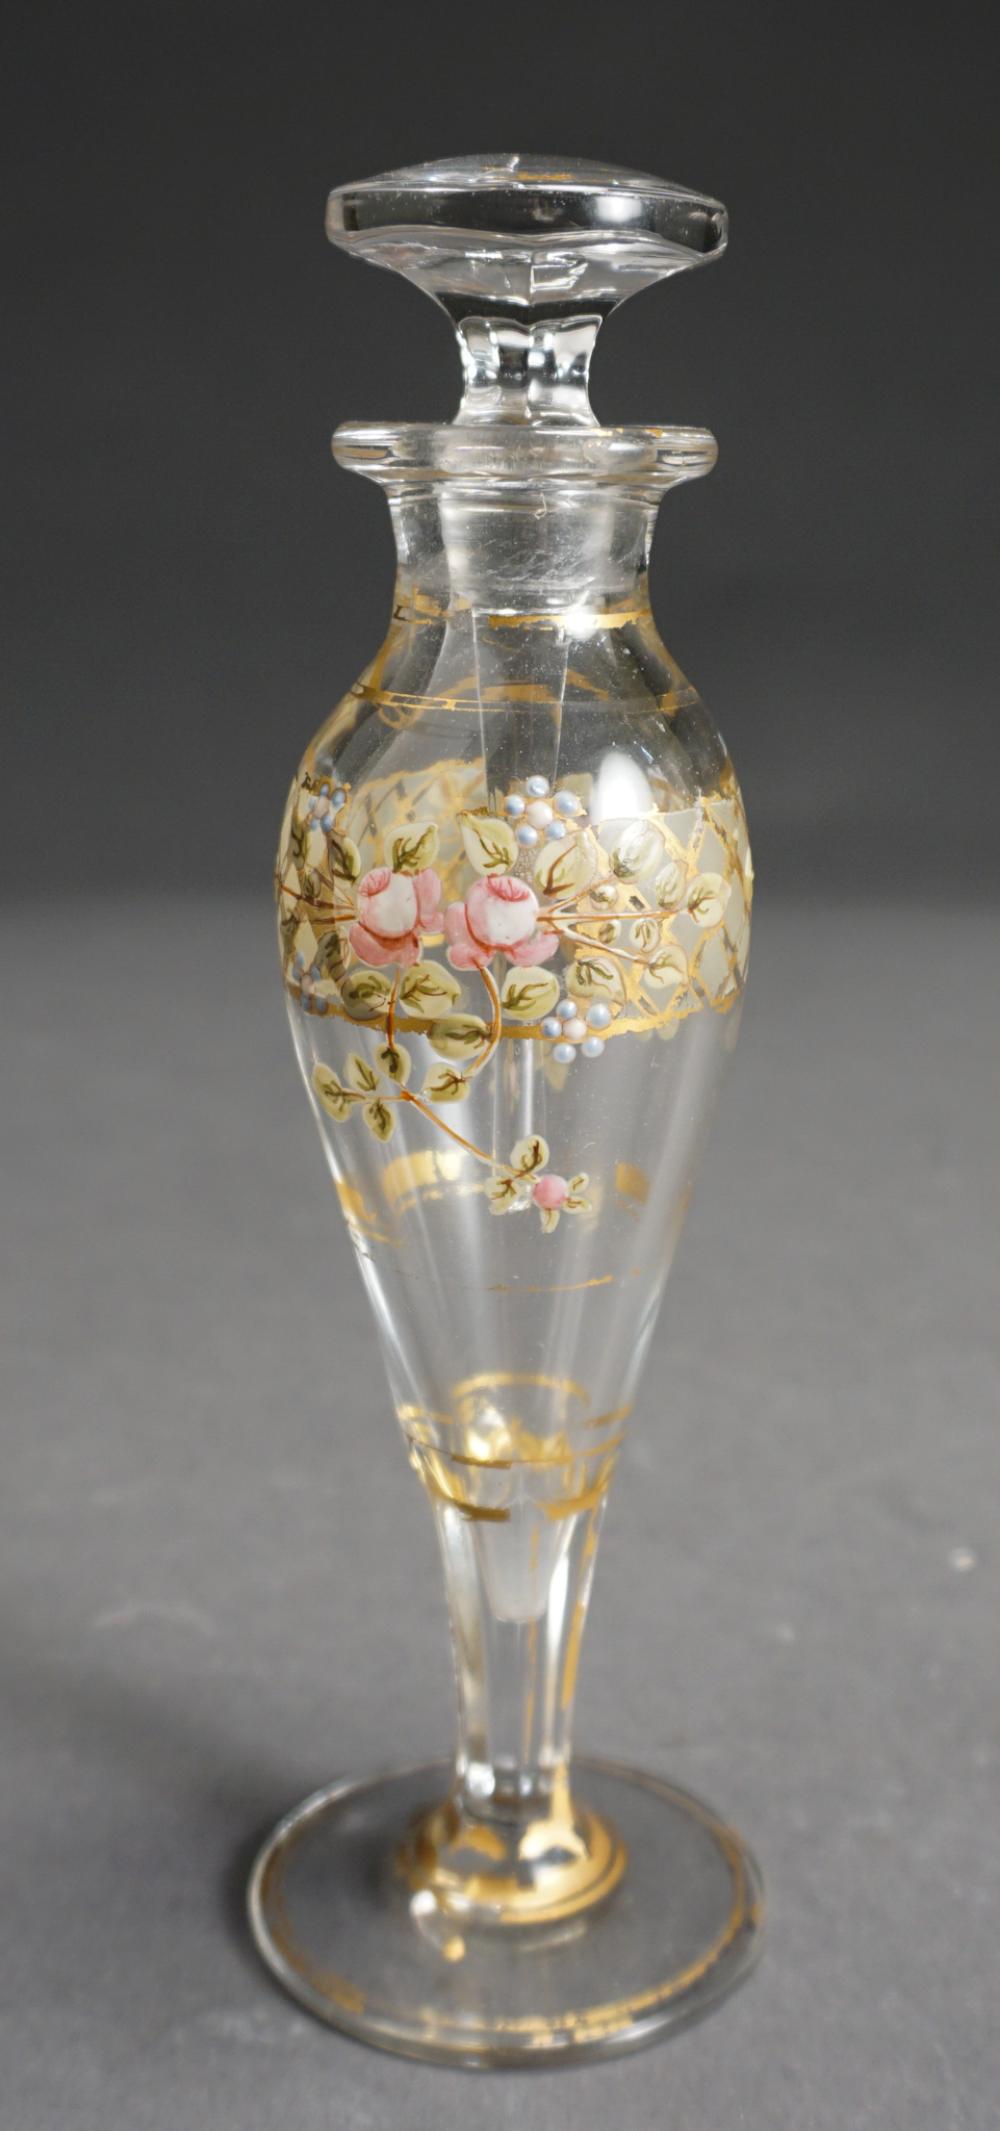 GILT AND ENAMEL DECORATED GLASS PERFUME